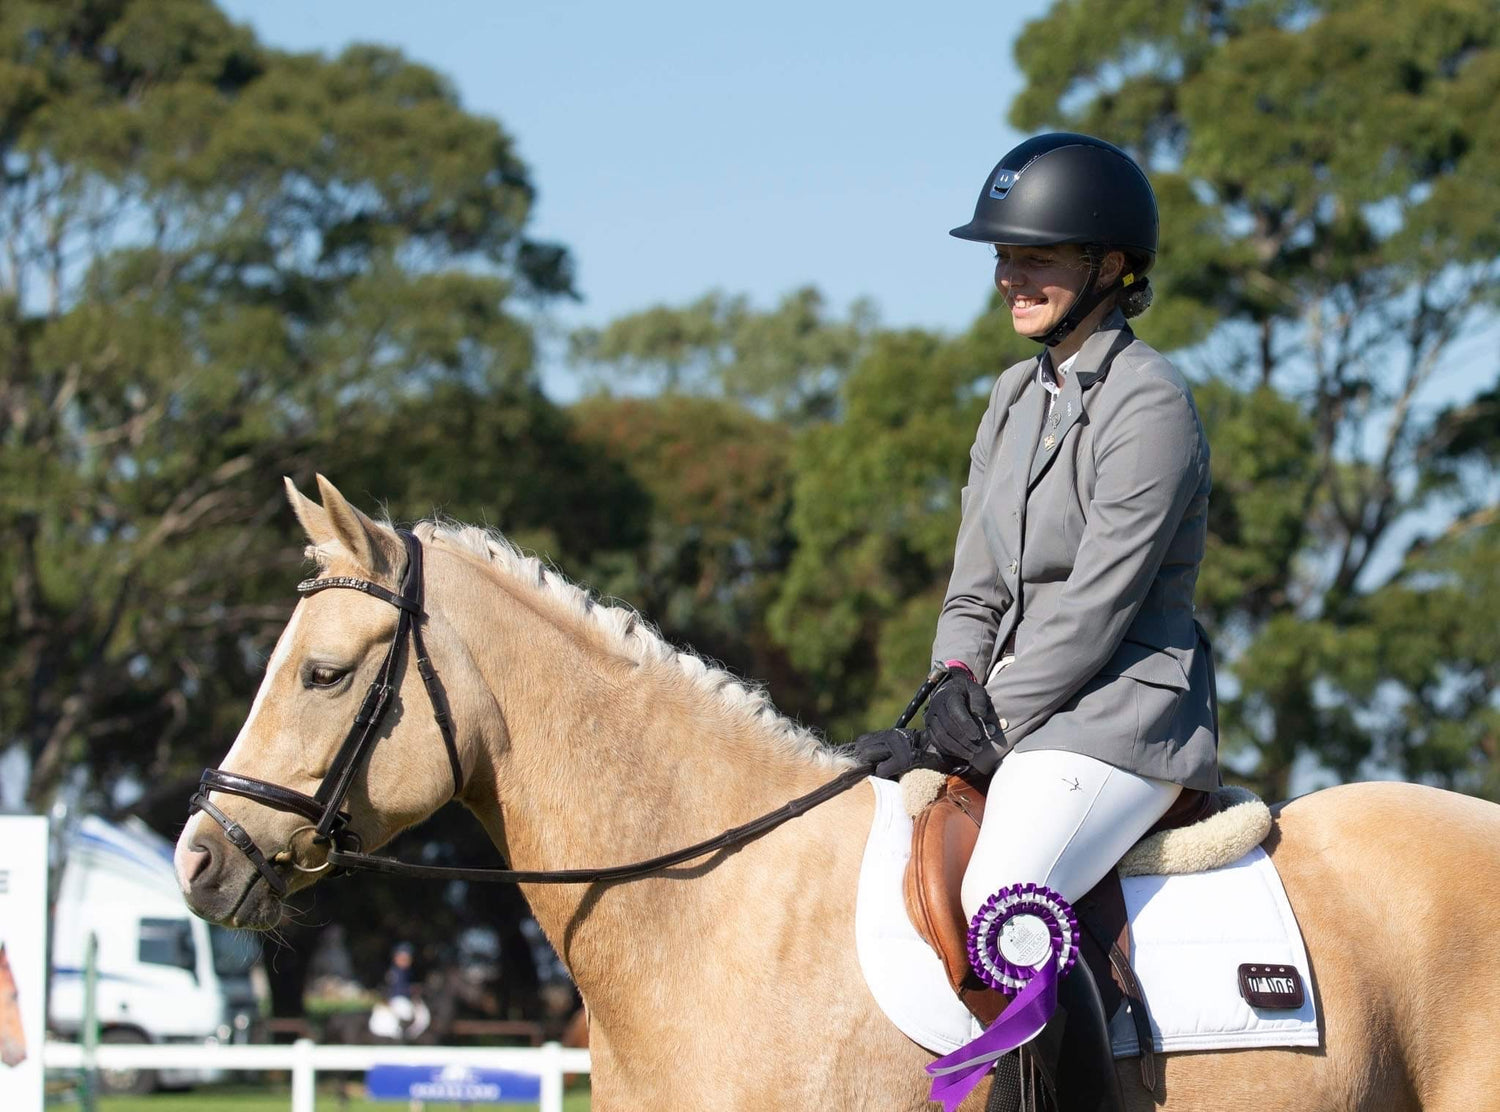 2022 PSI Dressage & Jumping with the Stars - written by Steph Hann